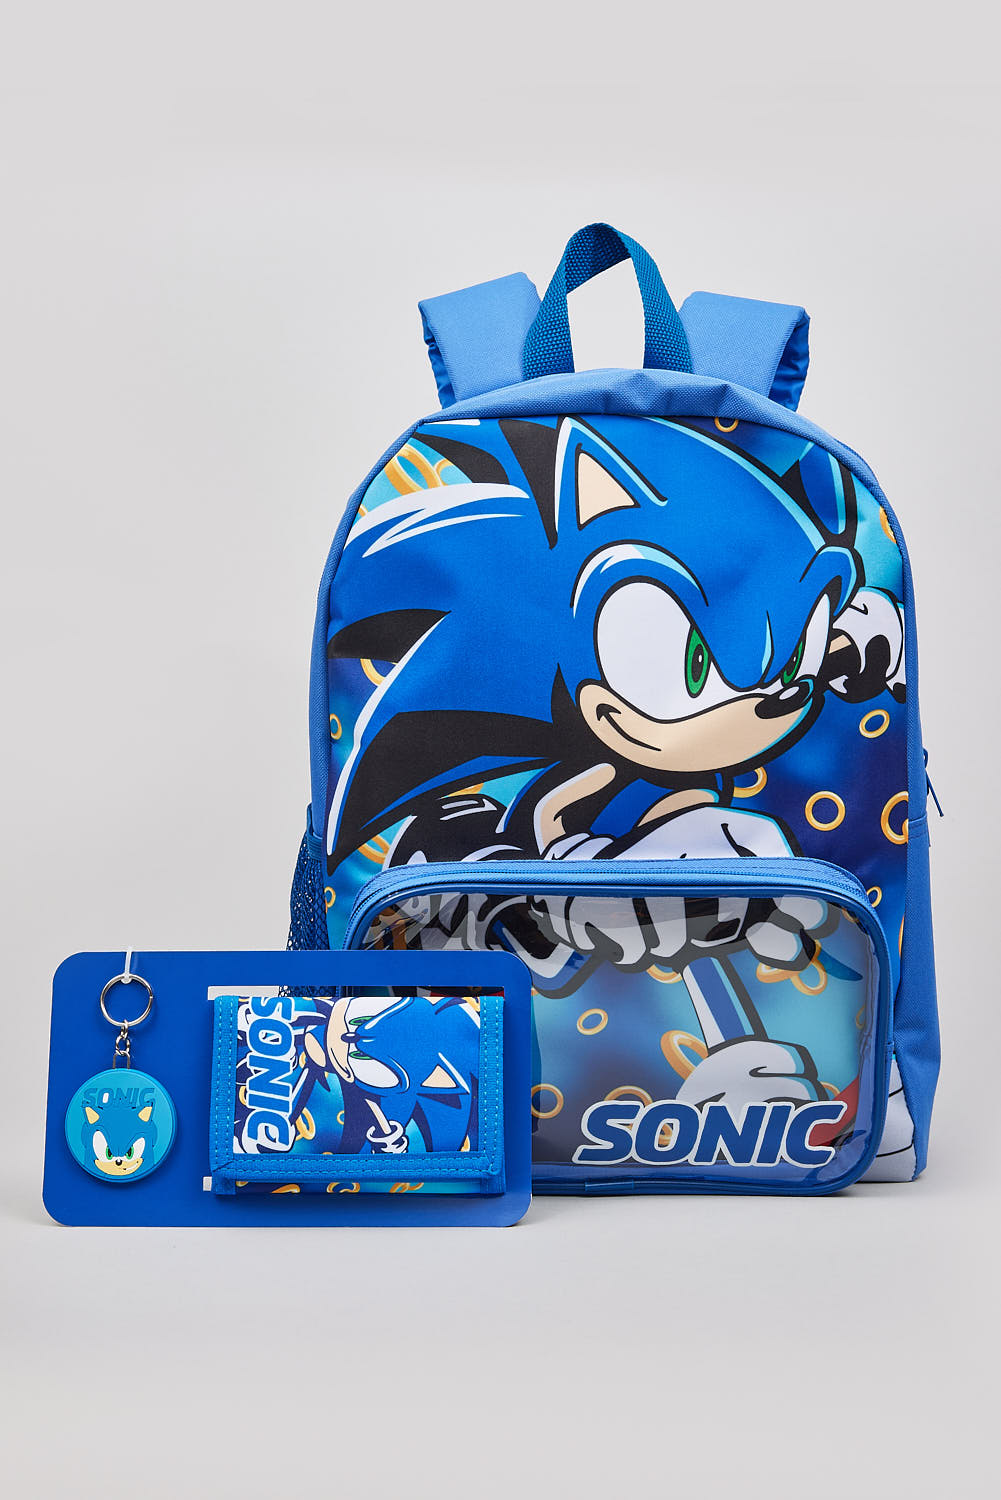 SONIC RINGS BACKPACK, WALLET AND KEYRING SET